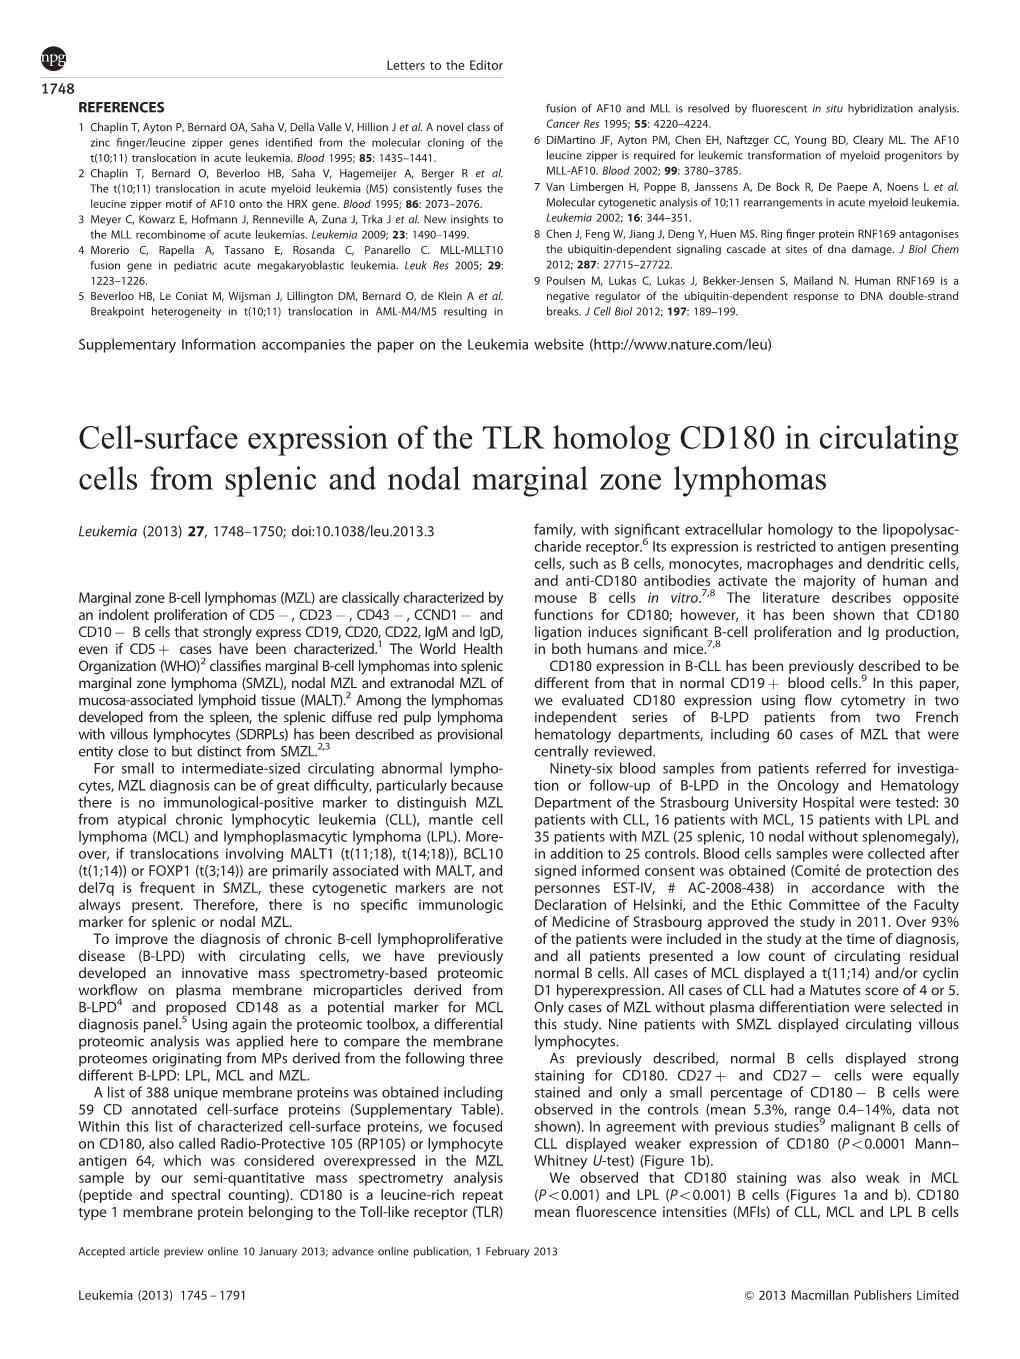 Cell-Surface Expression of the TLR Homolog CD180 in Circulating Cells from Splenic and Nodal Marginal Zone Lymphomas